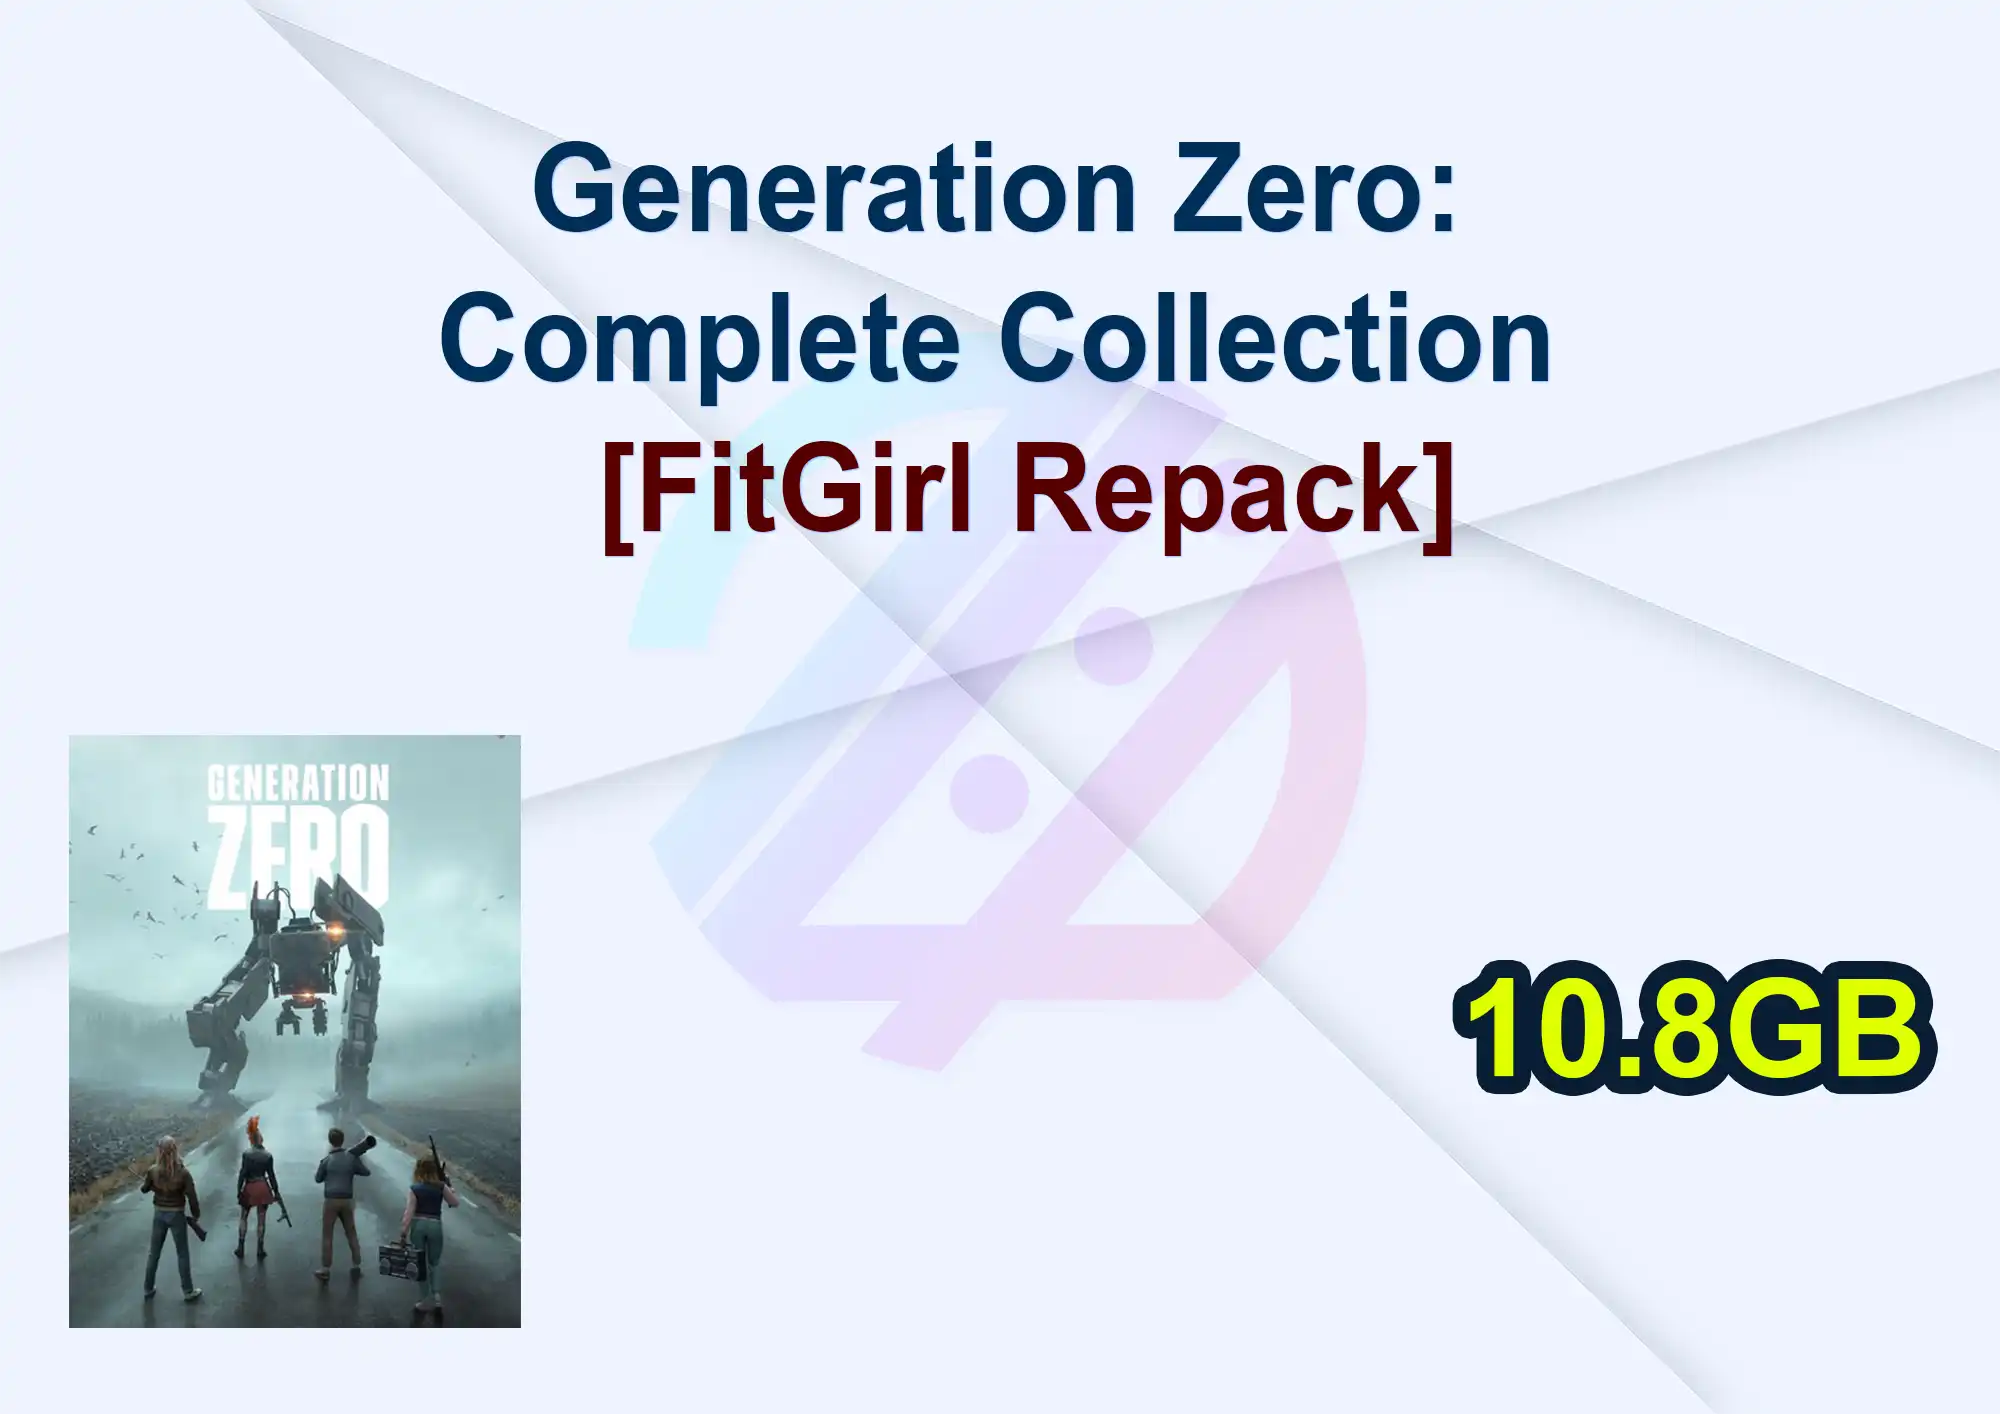 Generation Zero: Complete Collection (v2415920 + 19 DLCs, MULTi9) [FitGirl Repack]